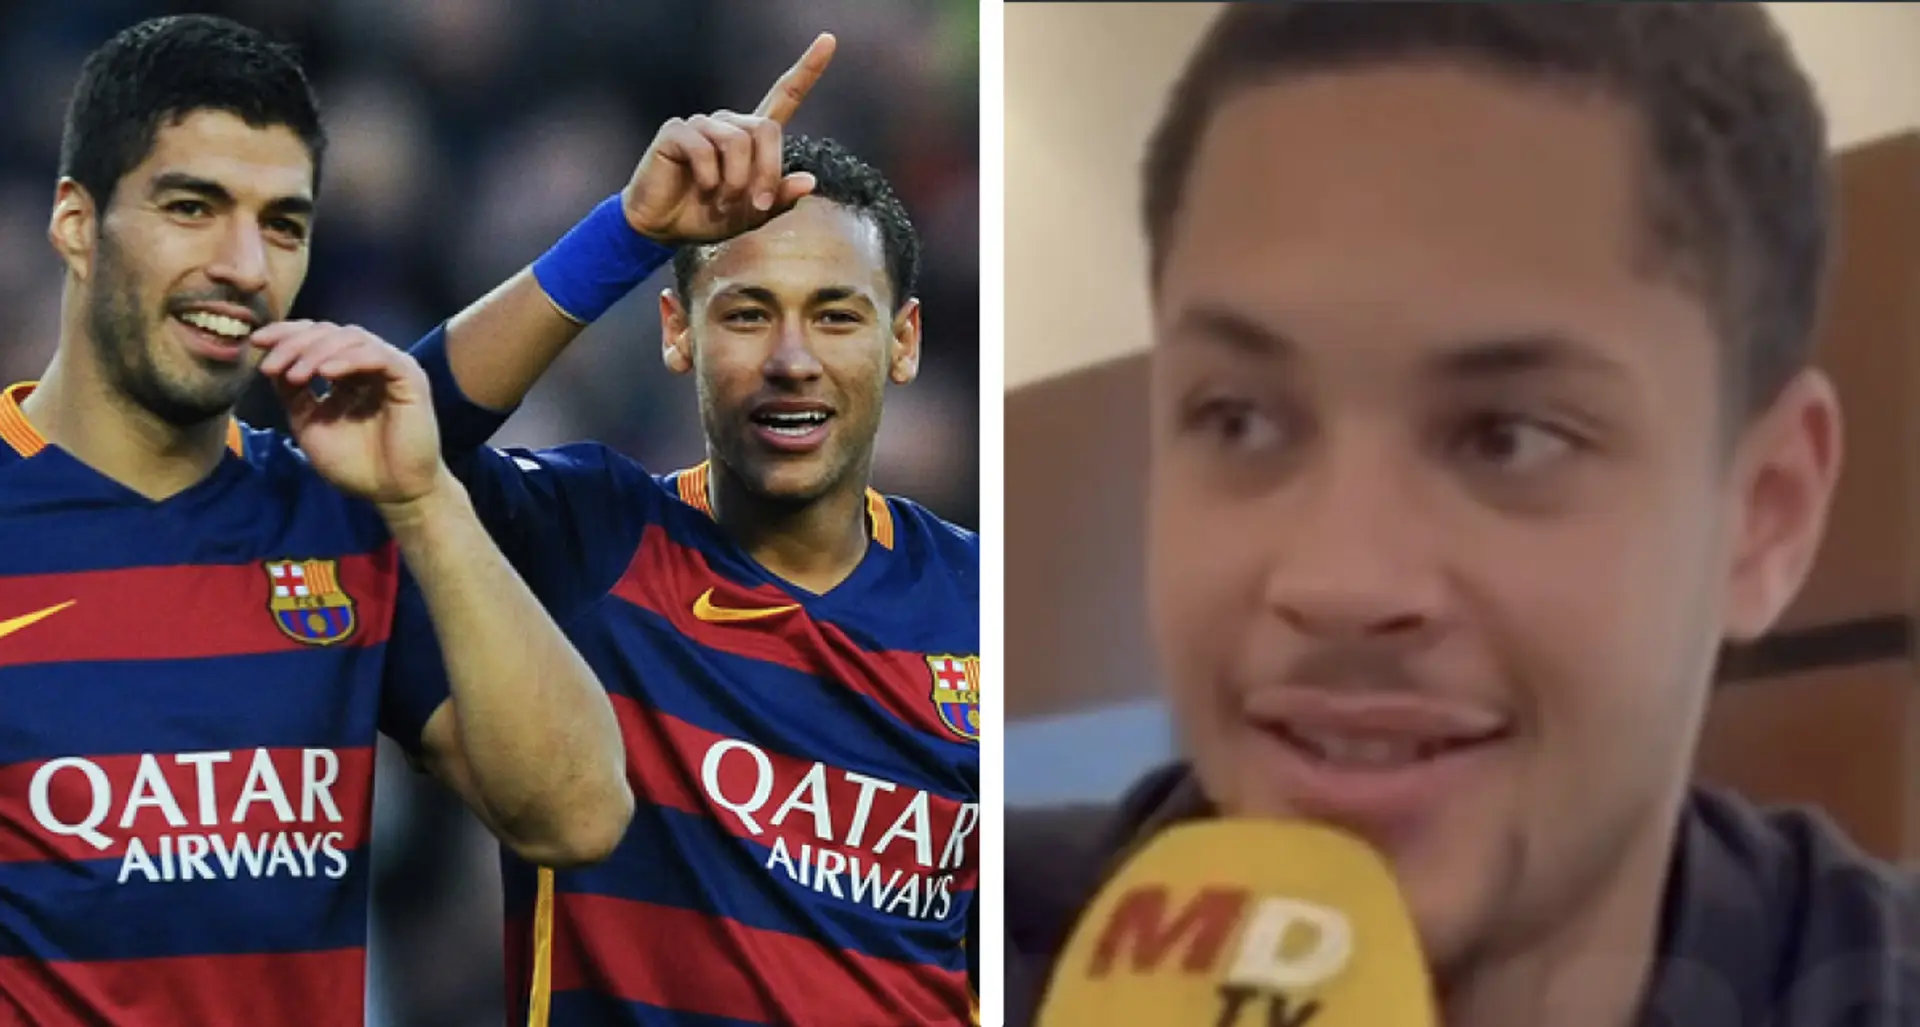 Vitor Roque names his 2 role models in football – one never played for Barca